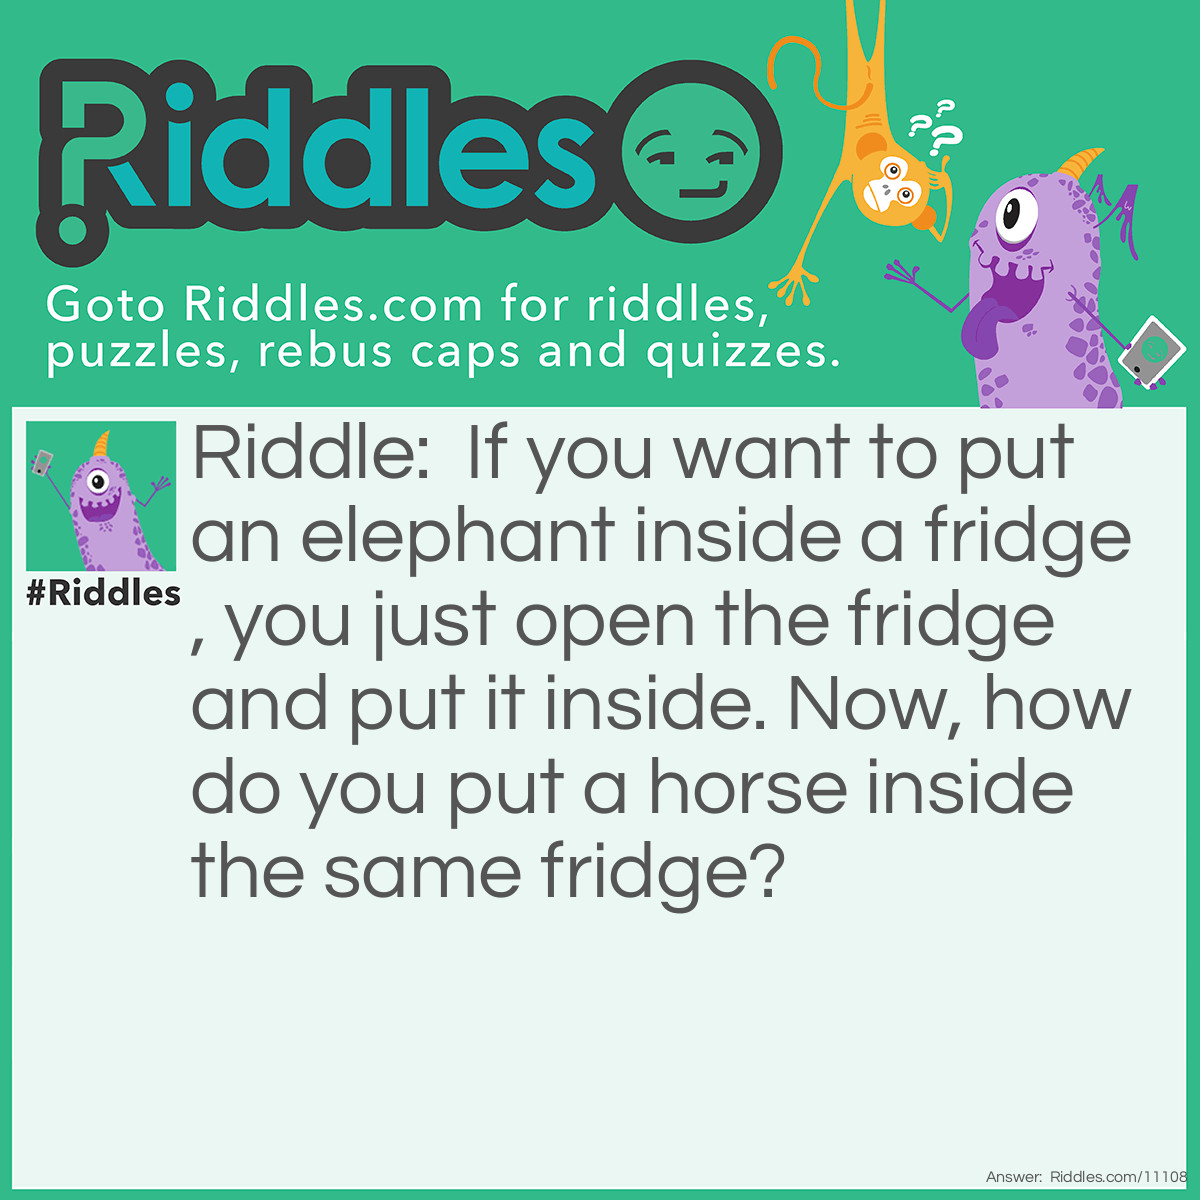 Riddle: If you want to put an elephant inside a fridge, you just open the fridge and put it inside. Now, how do you put a horse inside the same fridge? Answer: You open the fridge, remove the elephant, and put the horse.